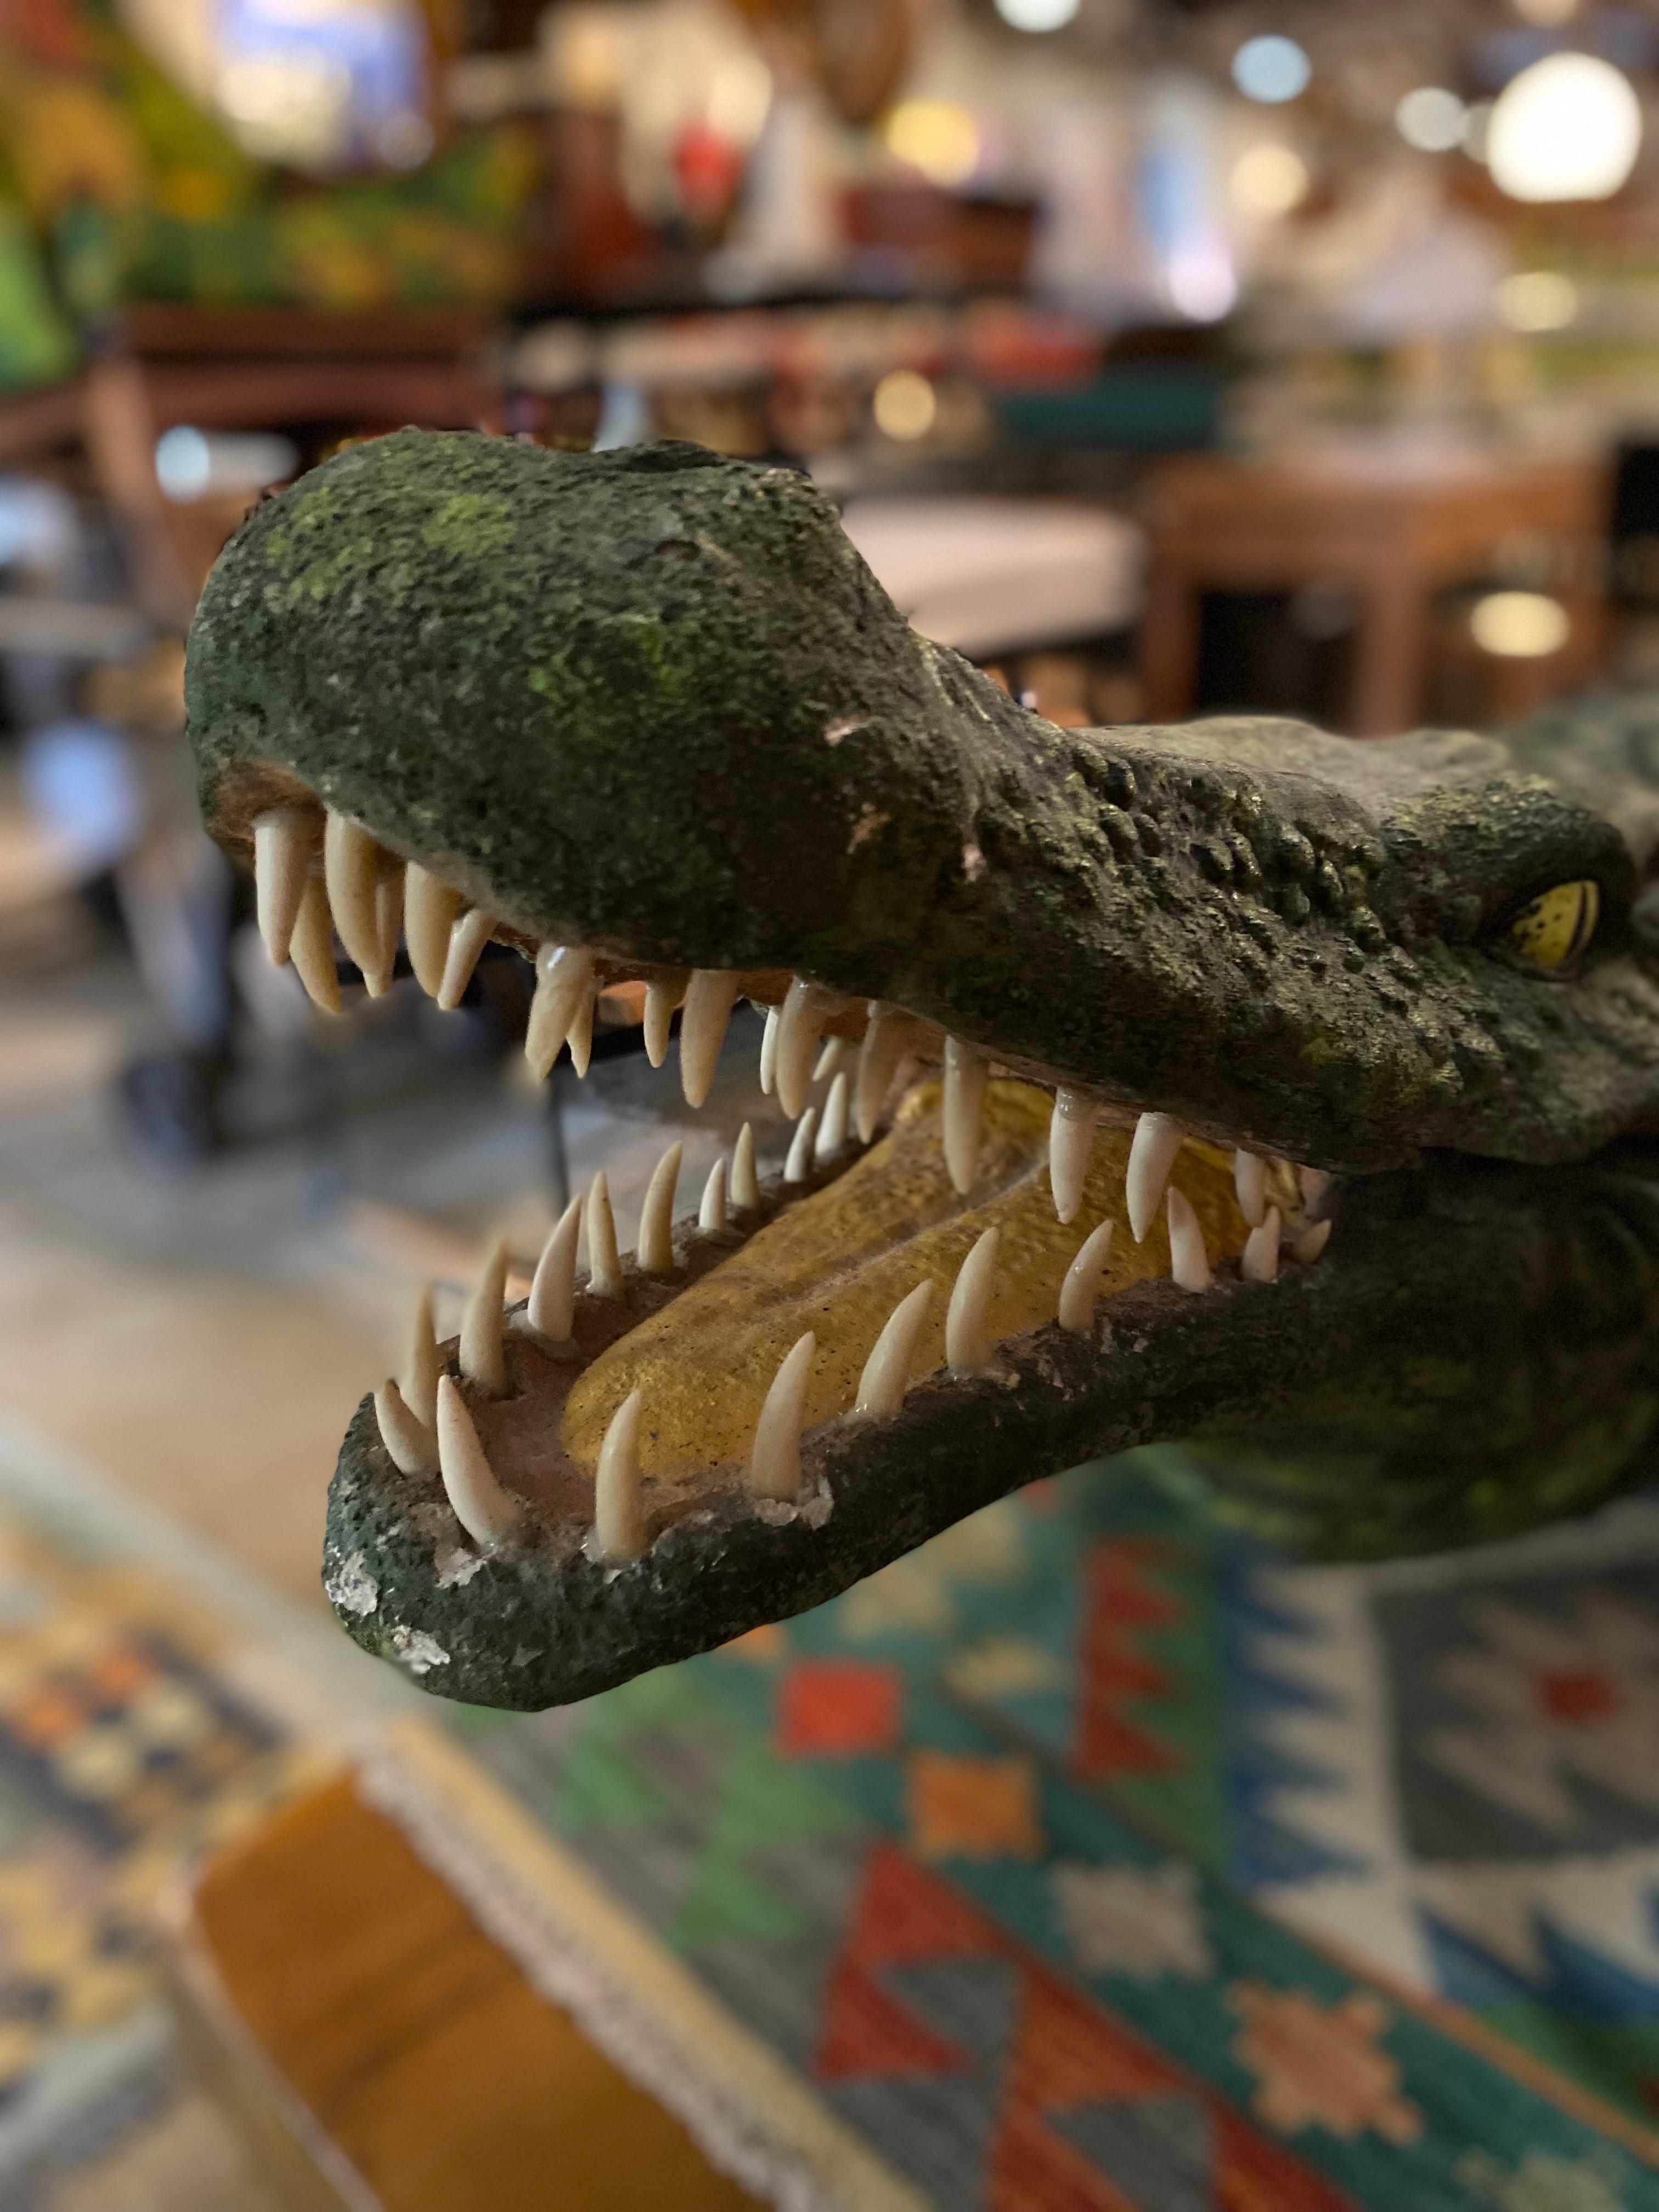 Large concrete alligator garden statue / sculpture created by Rene Romero, a San Antonio, Texas faux bois artist. Sculptor Rene Romero learned the art of faux bois from famed master artisan Carlos Cortes. This yard ornament is made of concrete and